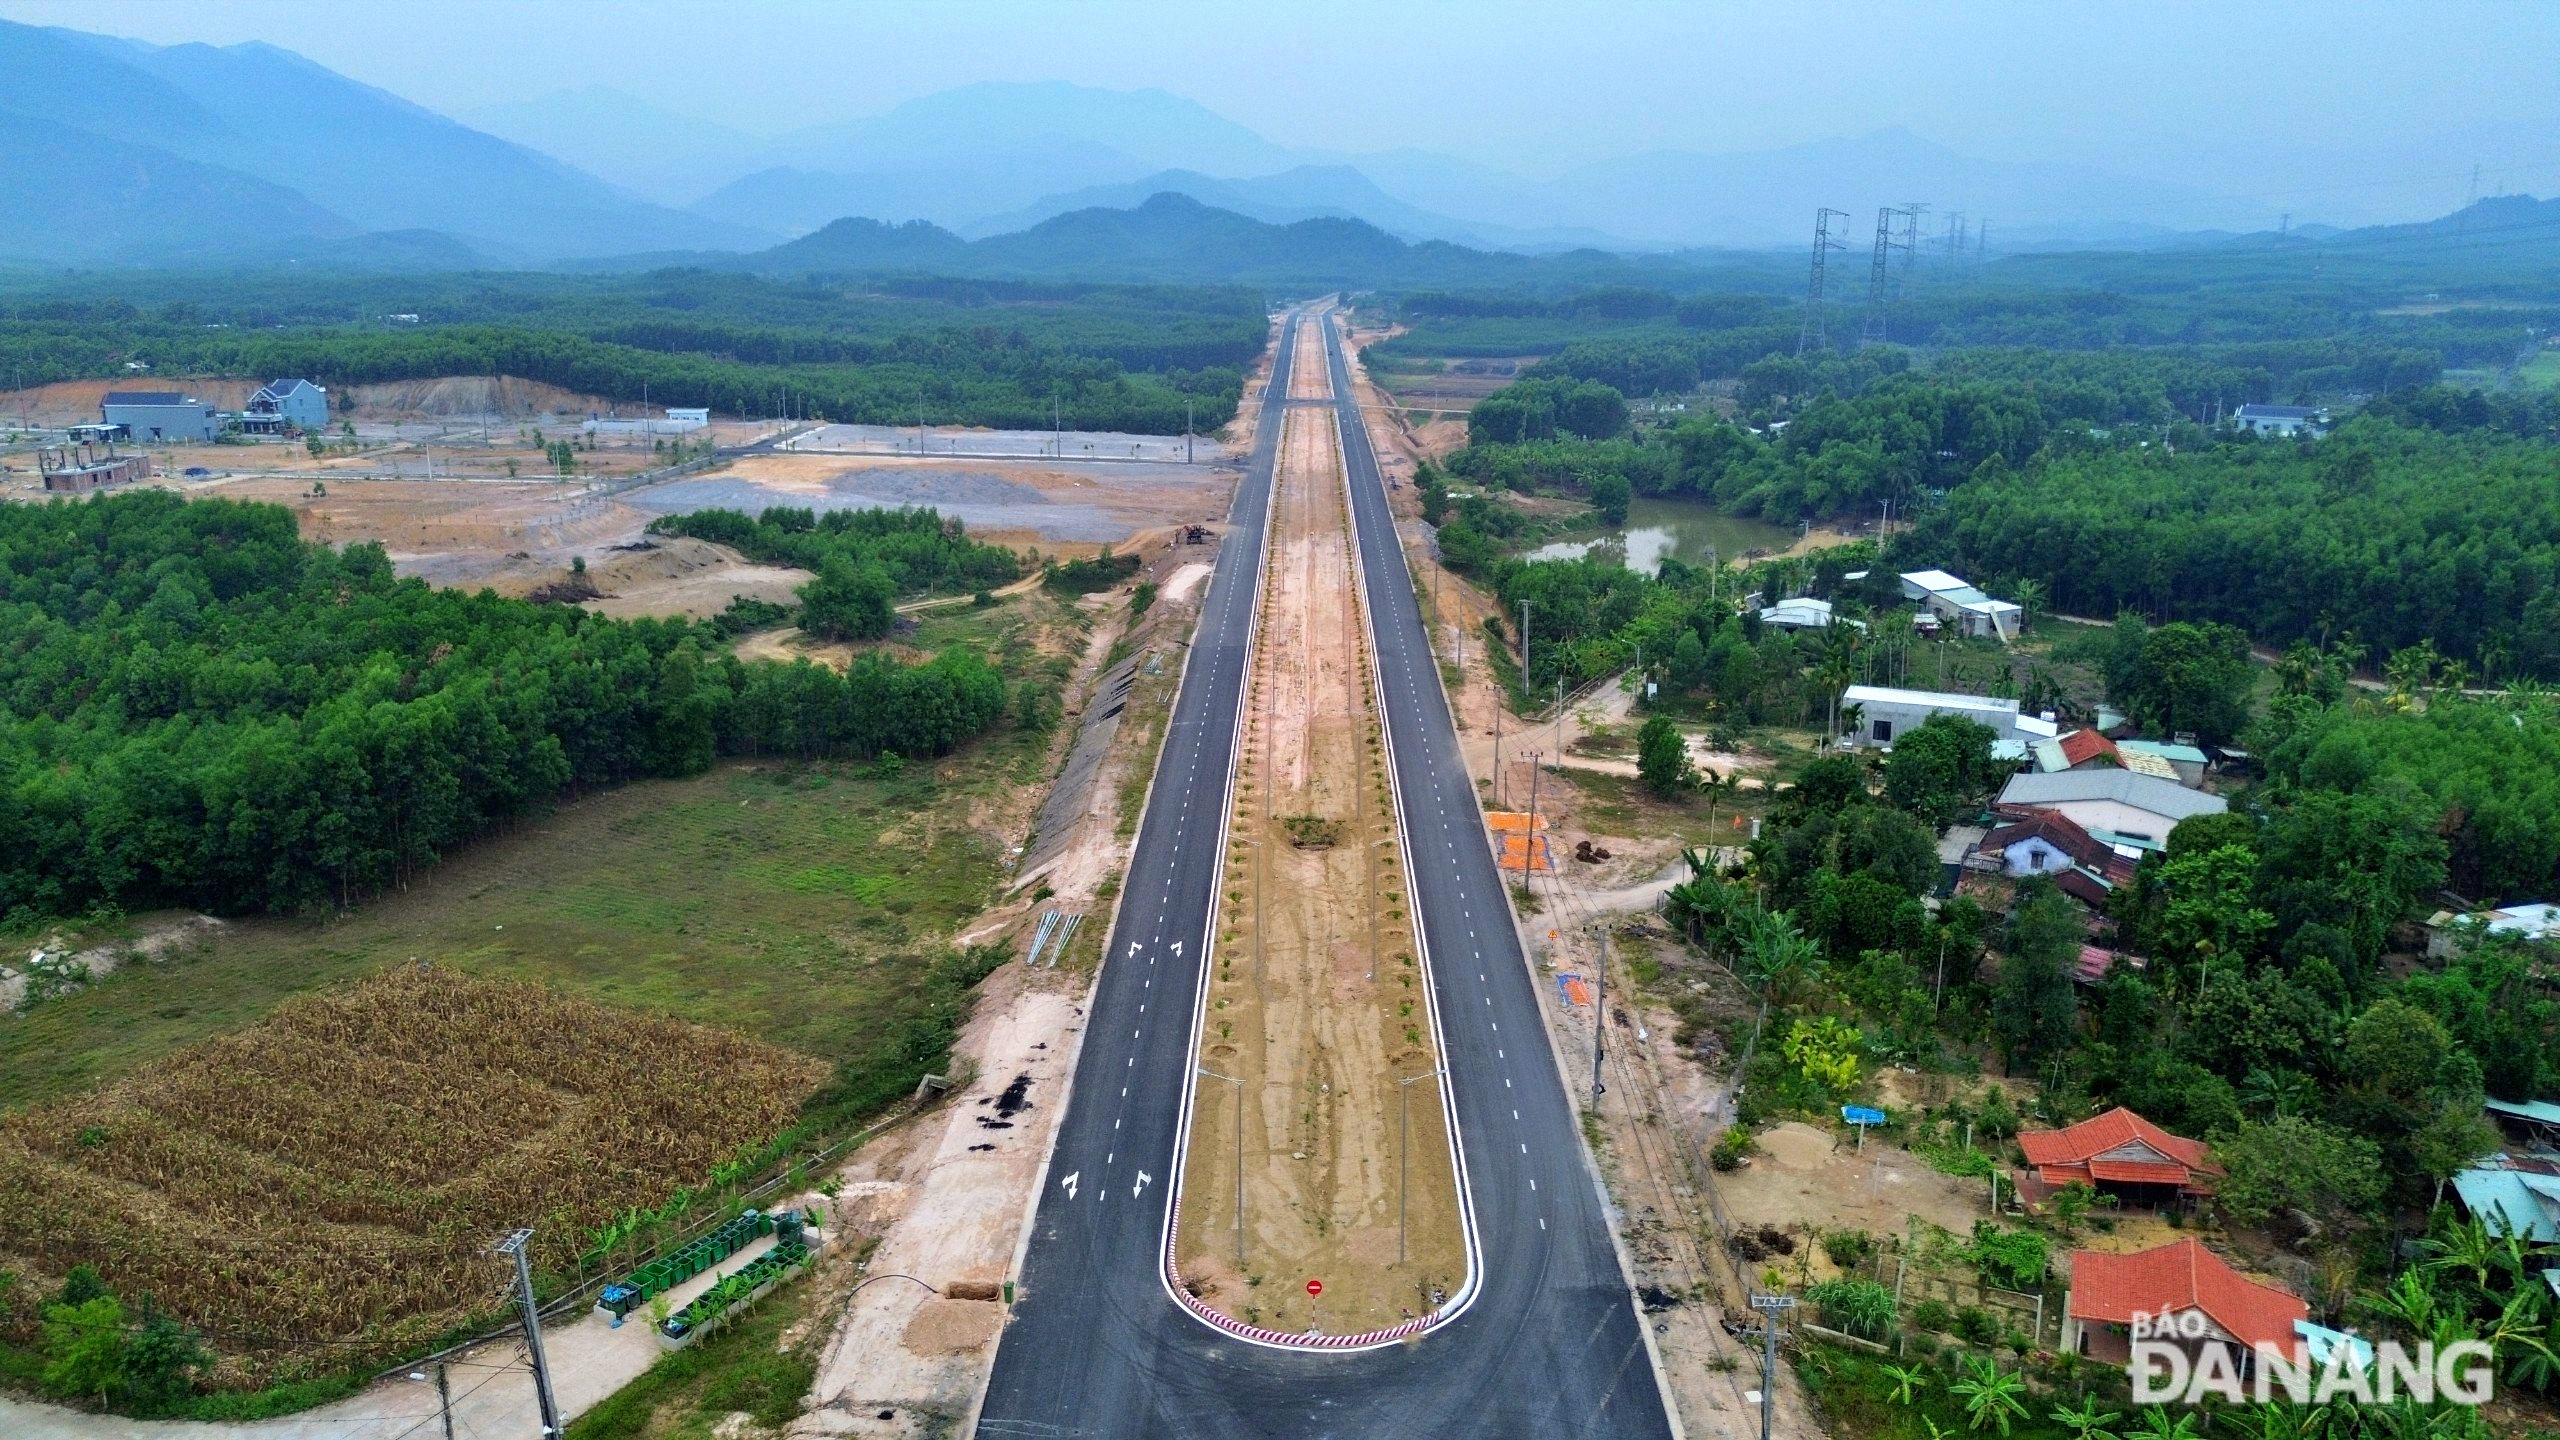 According to the Da Nang Management Board of Traffic Construction Investment Projects, the investor of the project, the main route was opened to traffic on December 31, 2023. Meanwhile, the expansion of National Highway 14B will be completed within 6 months from the date of handover of the premises.